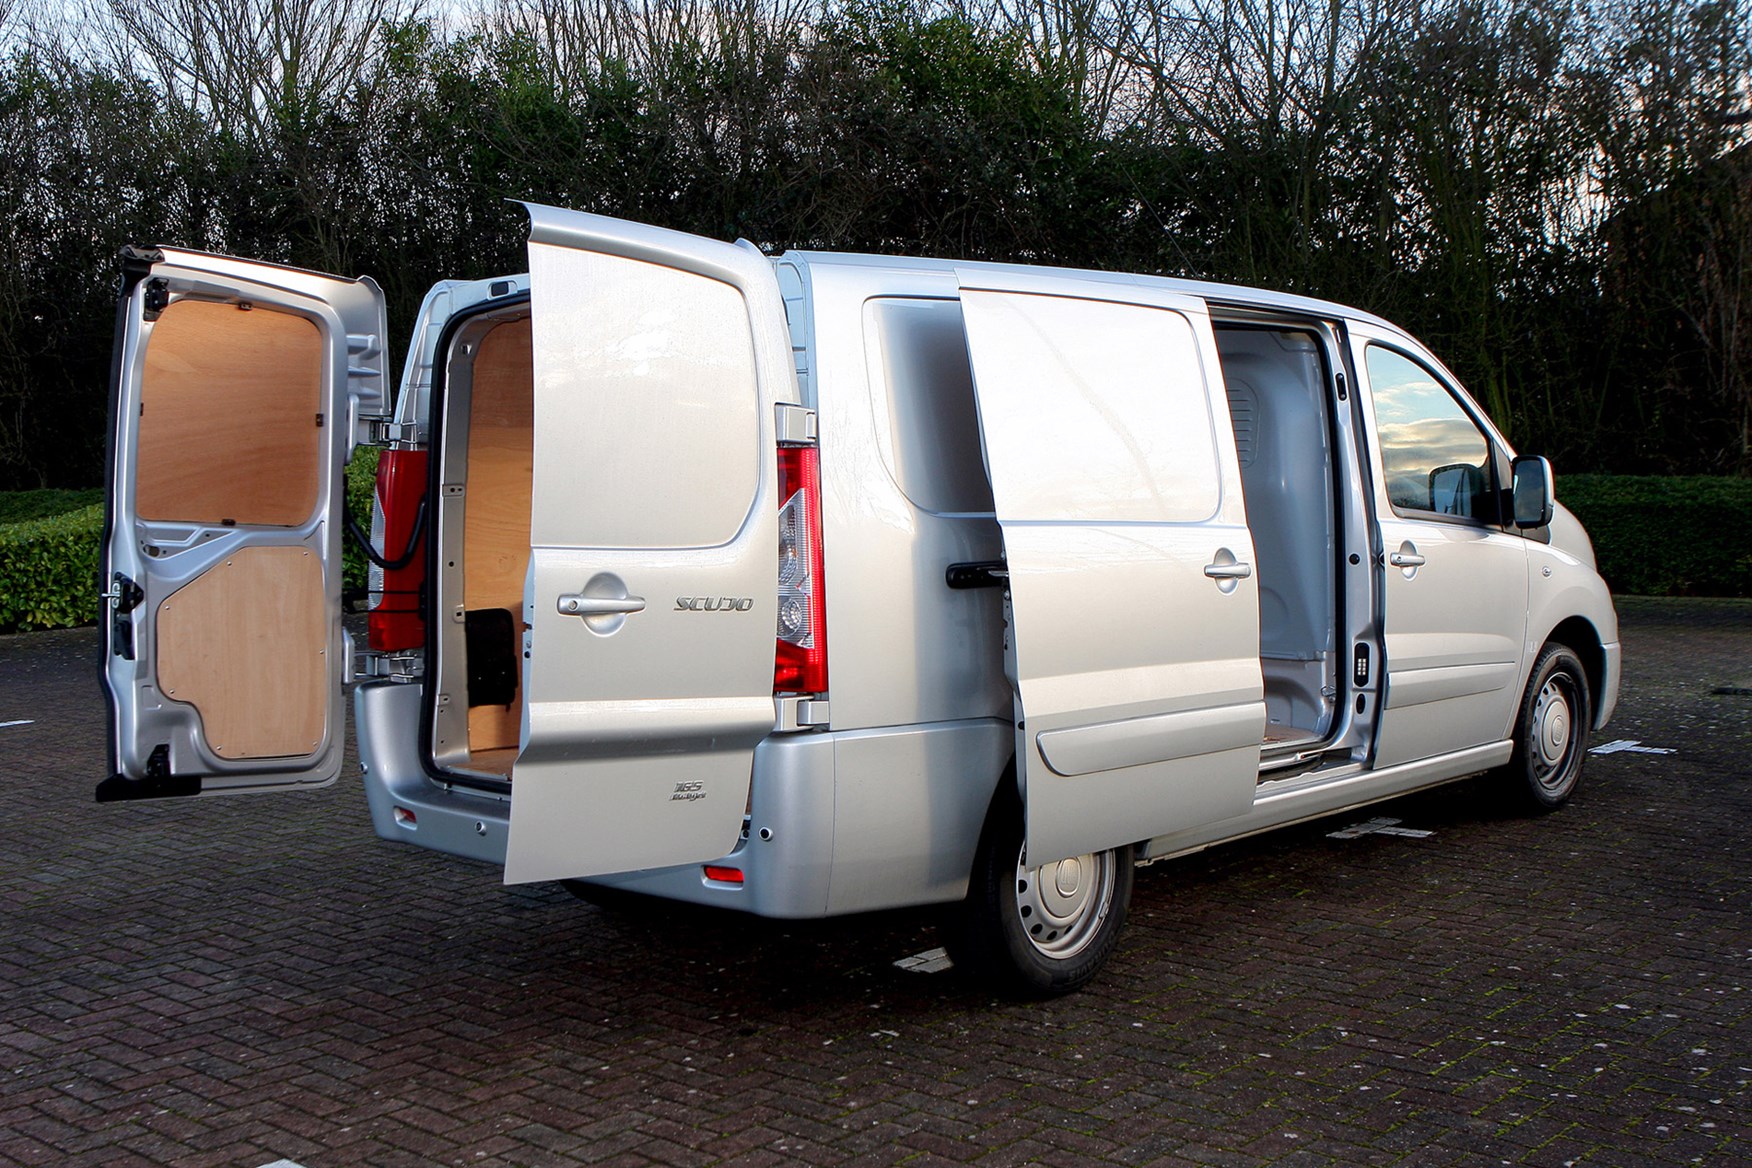 Fiat Scudo 2007-2016 review on Parkers Vans - dimensions and load area